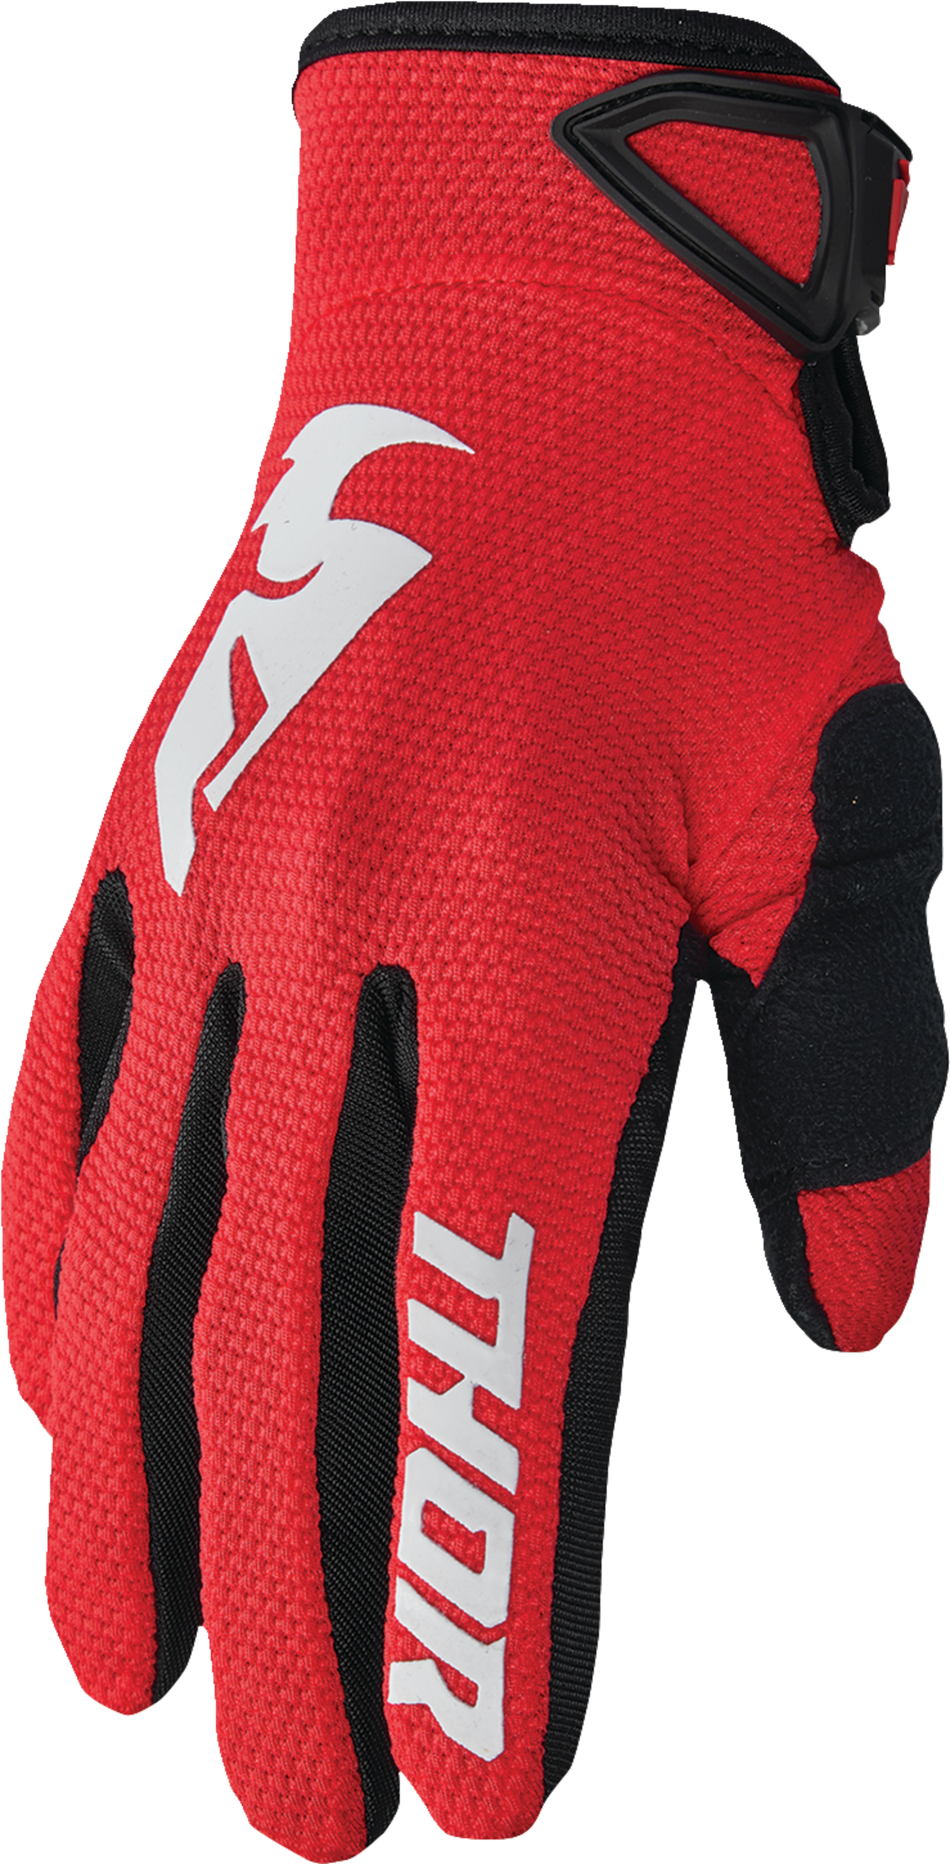 THOR Sector Gloves - Red/White - Large 3330-7270